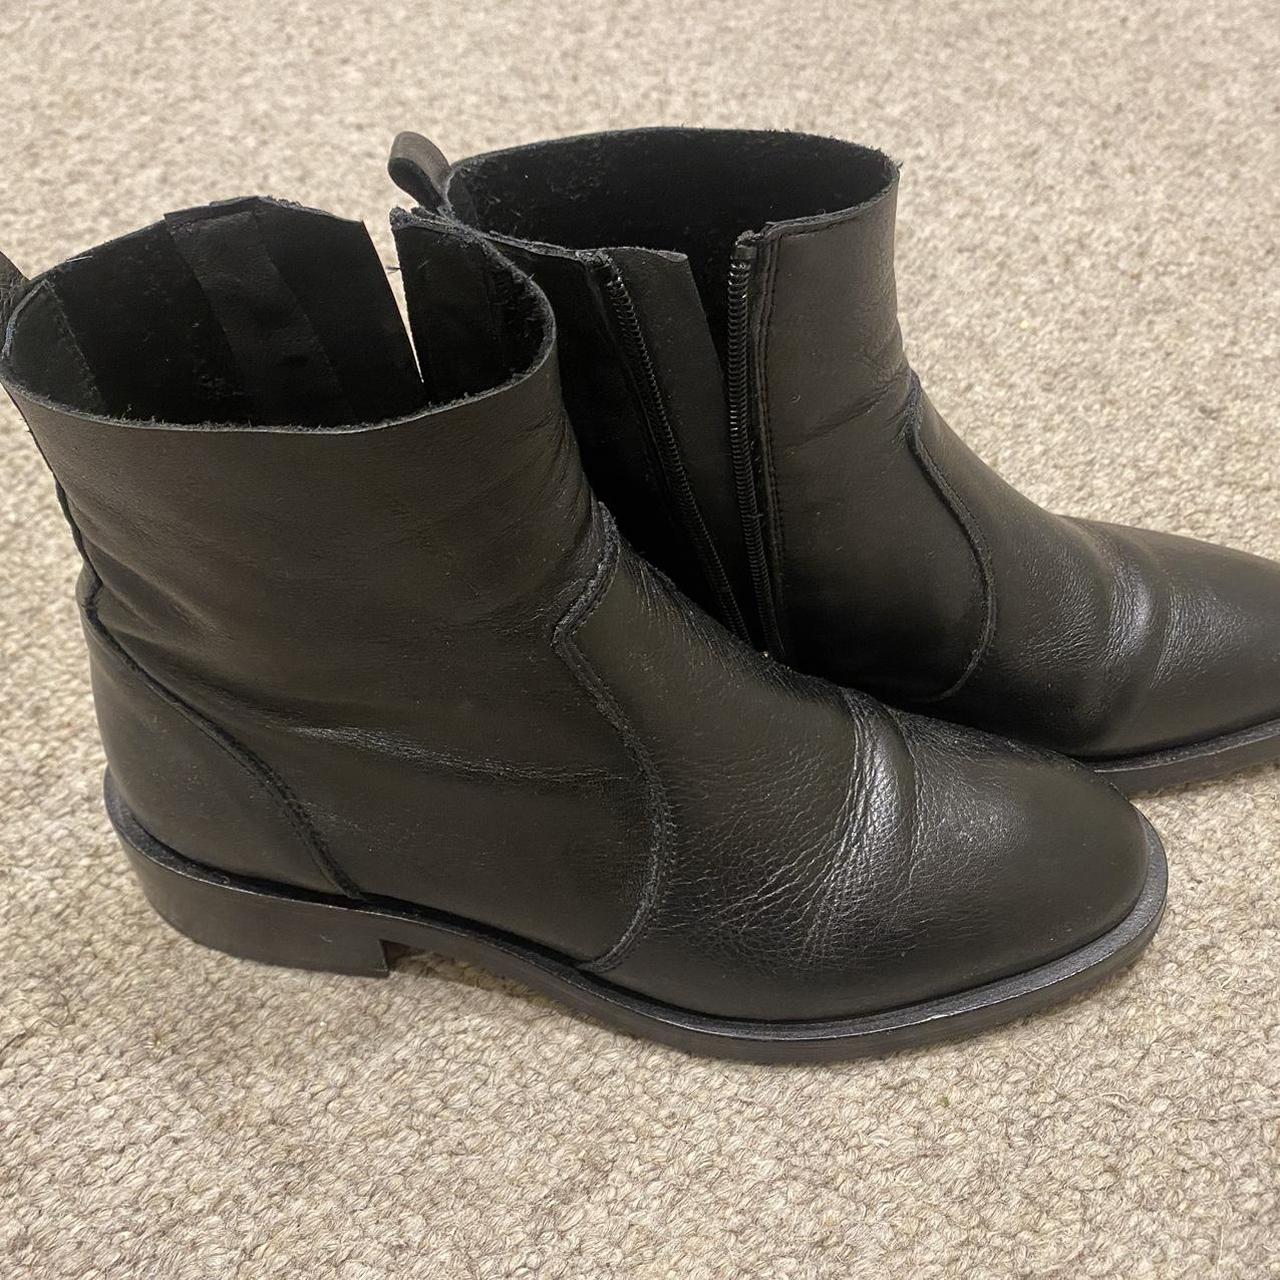 Black leather Chelsea / ankle boots from Office.... - Depop